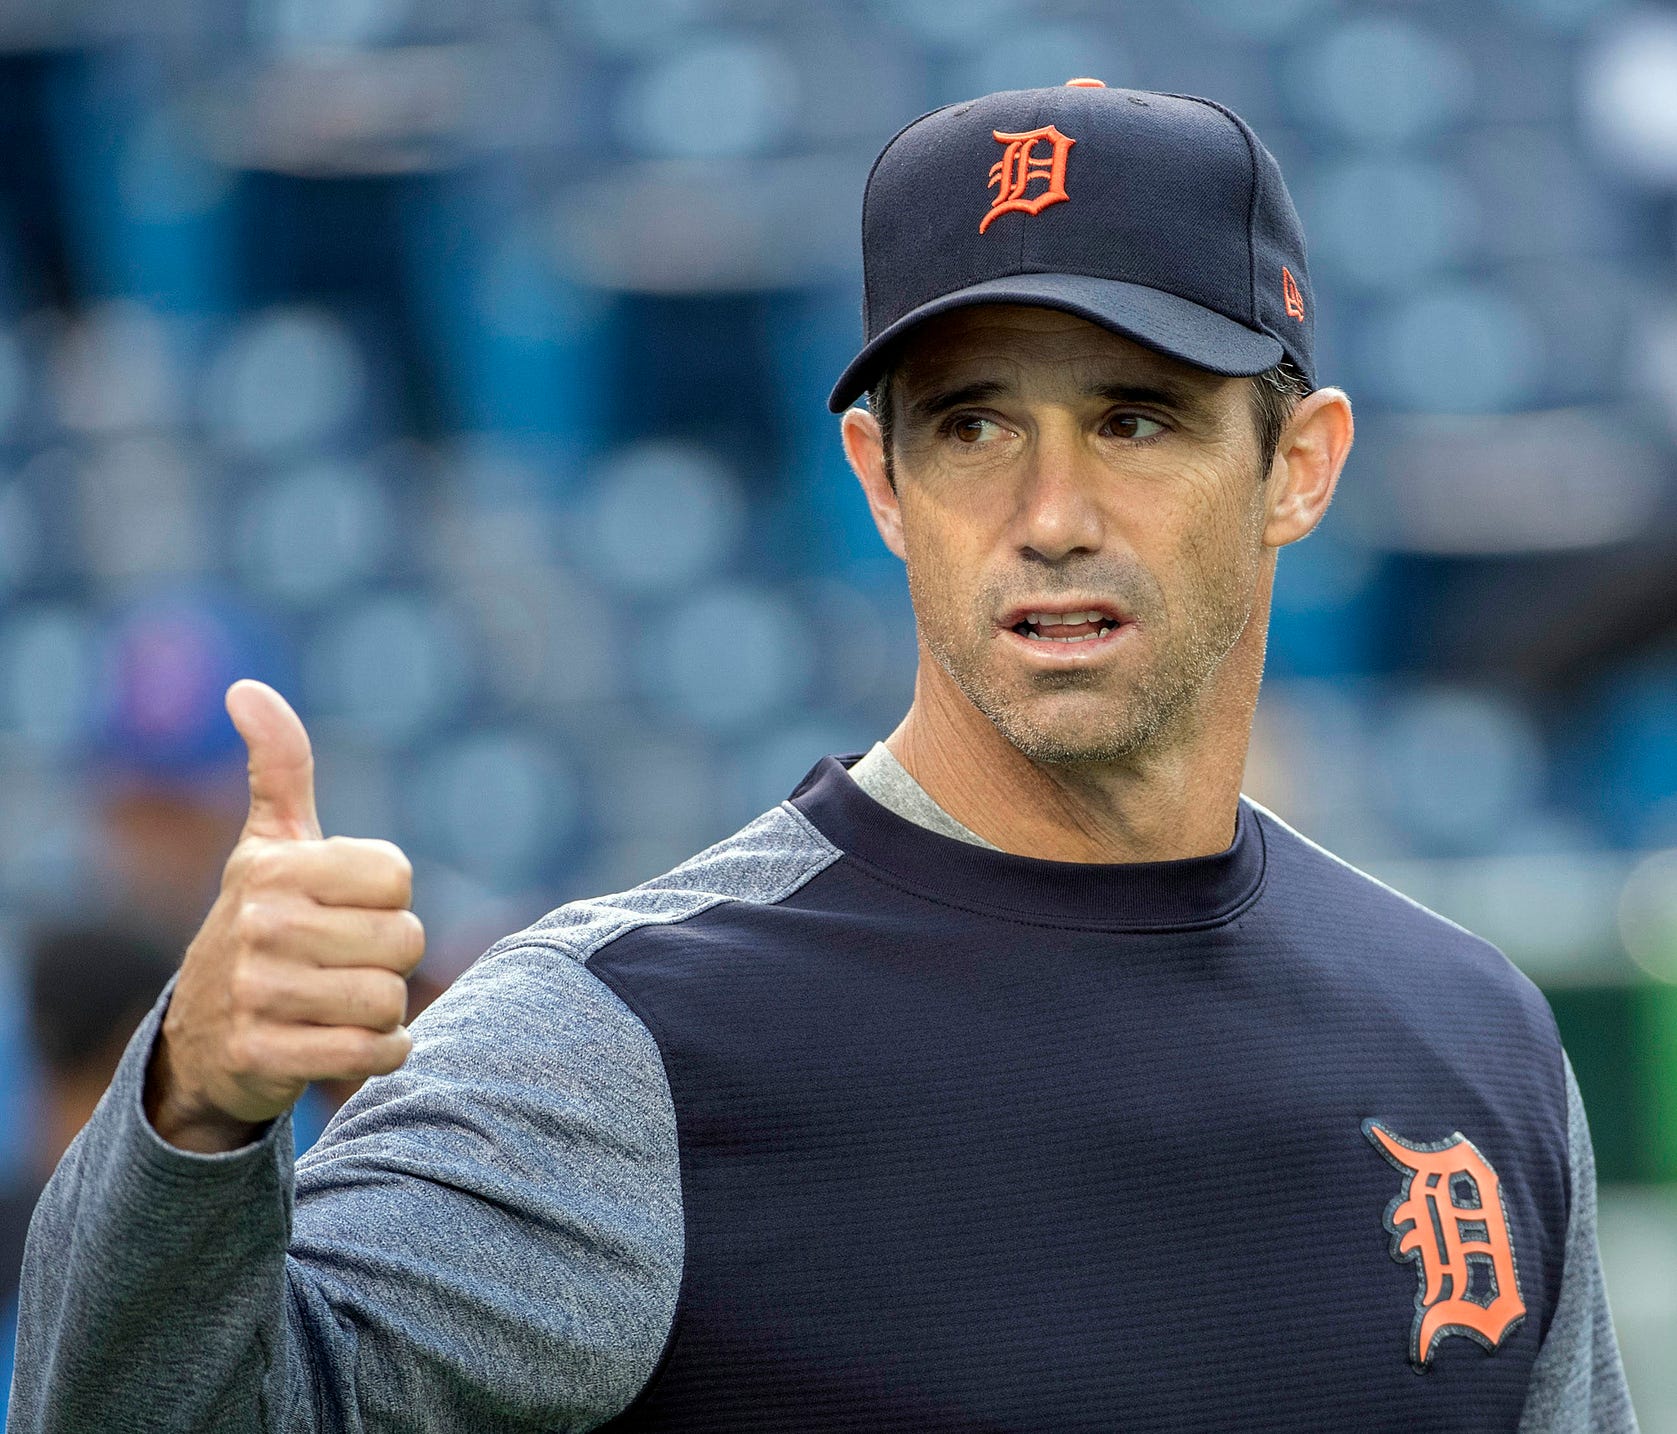 Tigers manager Brad Ausmus (7) gestures with his thumb during batting practice before a game on Friday, Sept. 8, 2017, in Toronto.